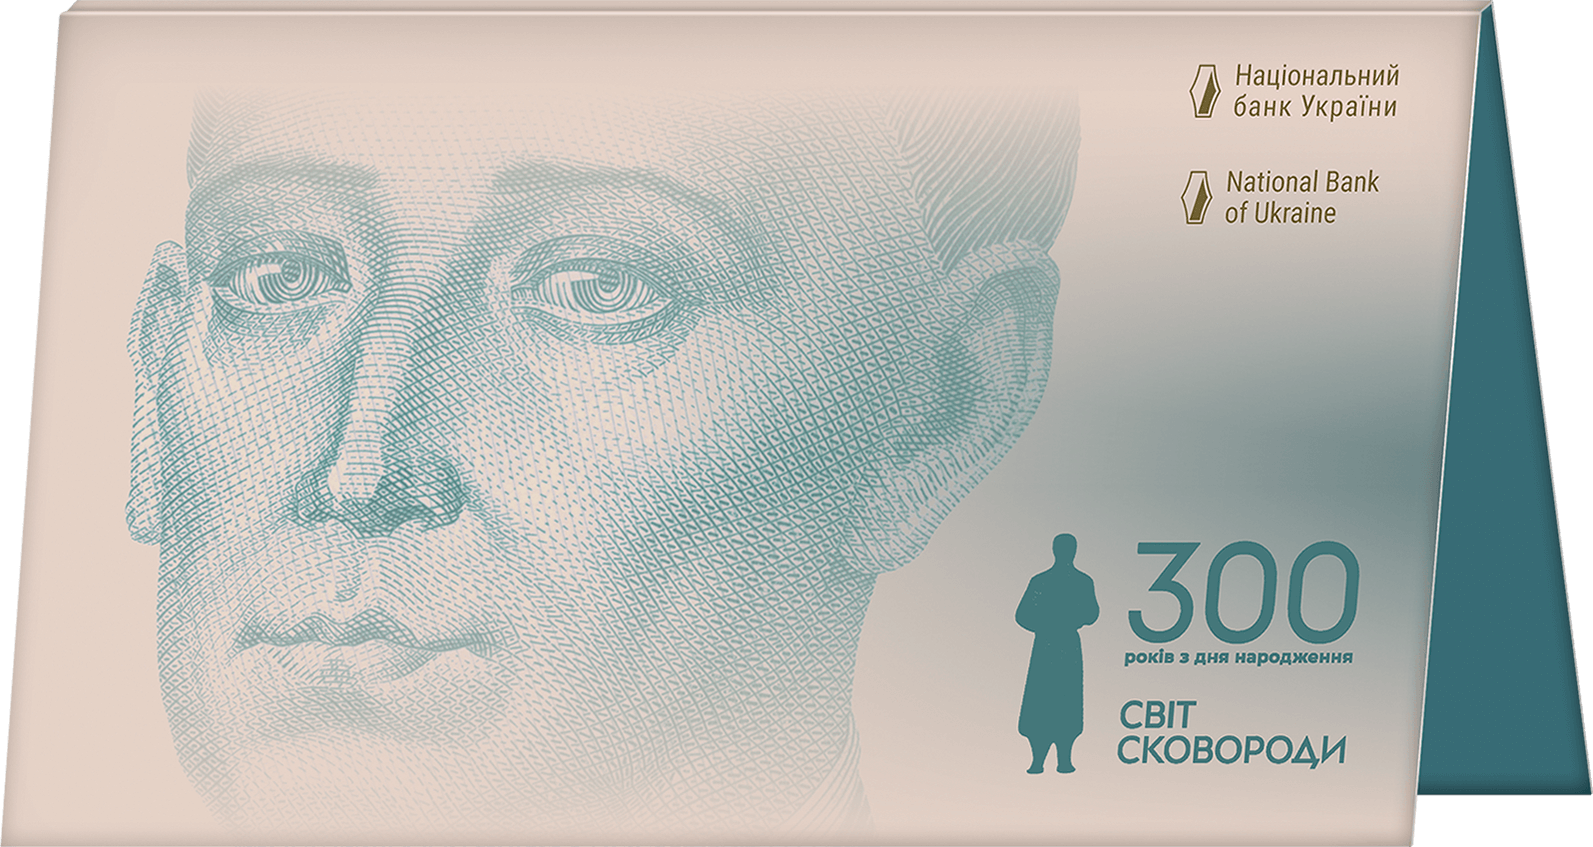 Banknote (in souvenir packaging) replicating the 500 hryvnia banknote designed in 2015 and commemorating the 300th anniversary of the birth of Hryhorii Skovoroda (obverse)